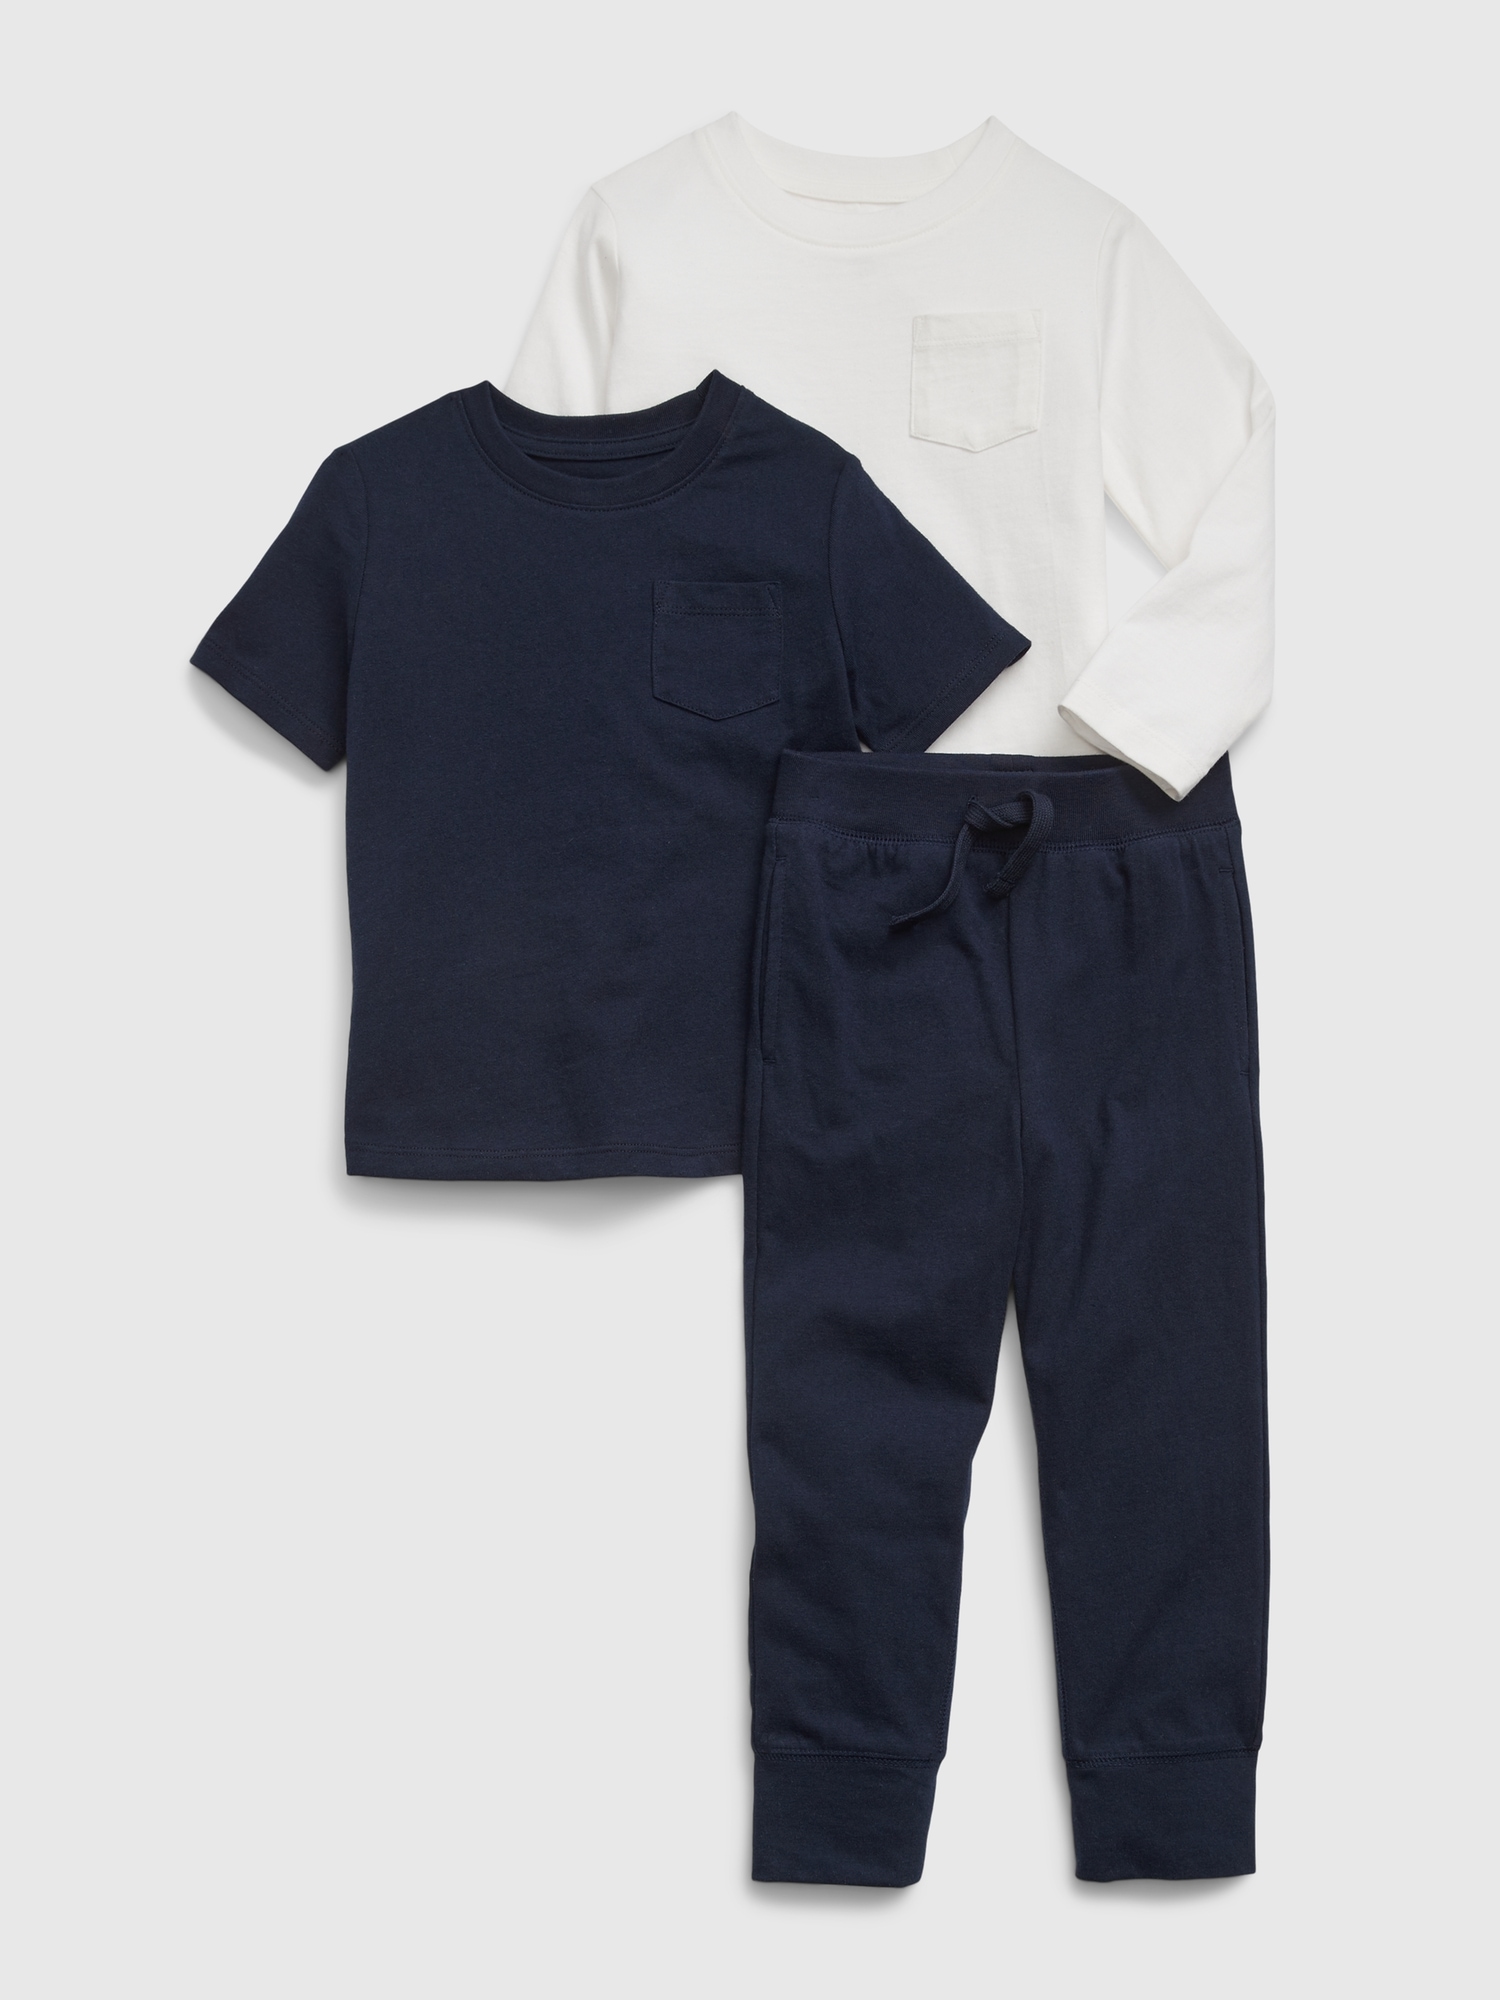 Toddler Mix and Match Outfit Set